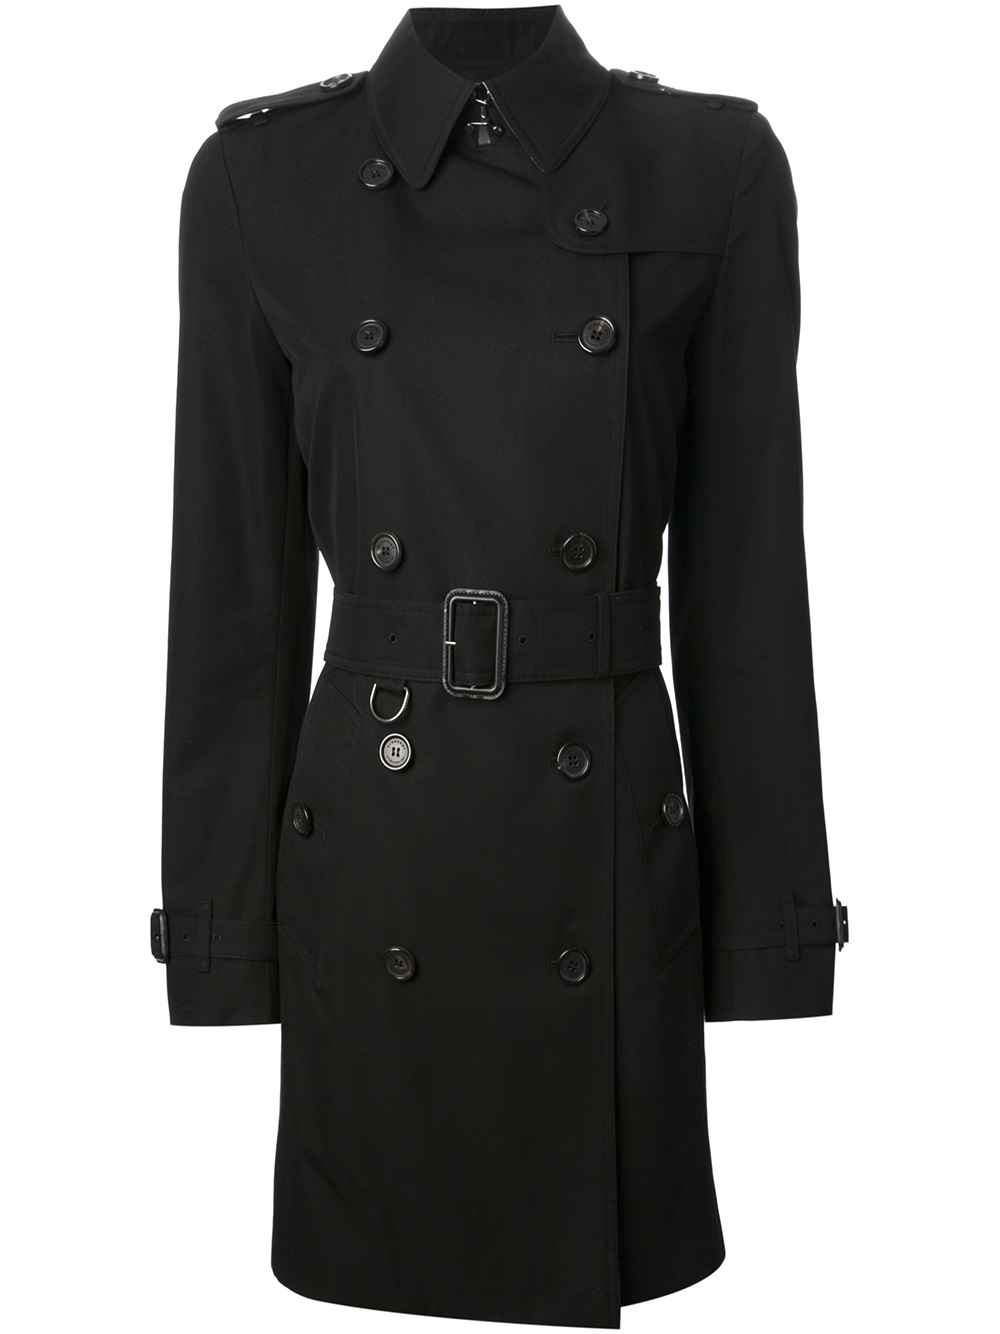 Lyst - Burberry 'Balmoral' Trench Coat in Black